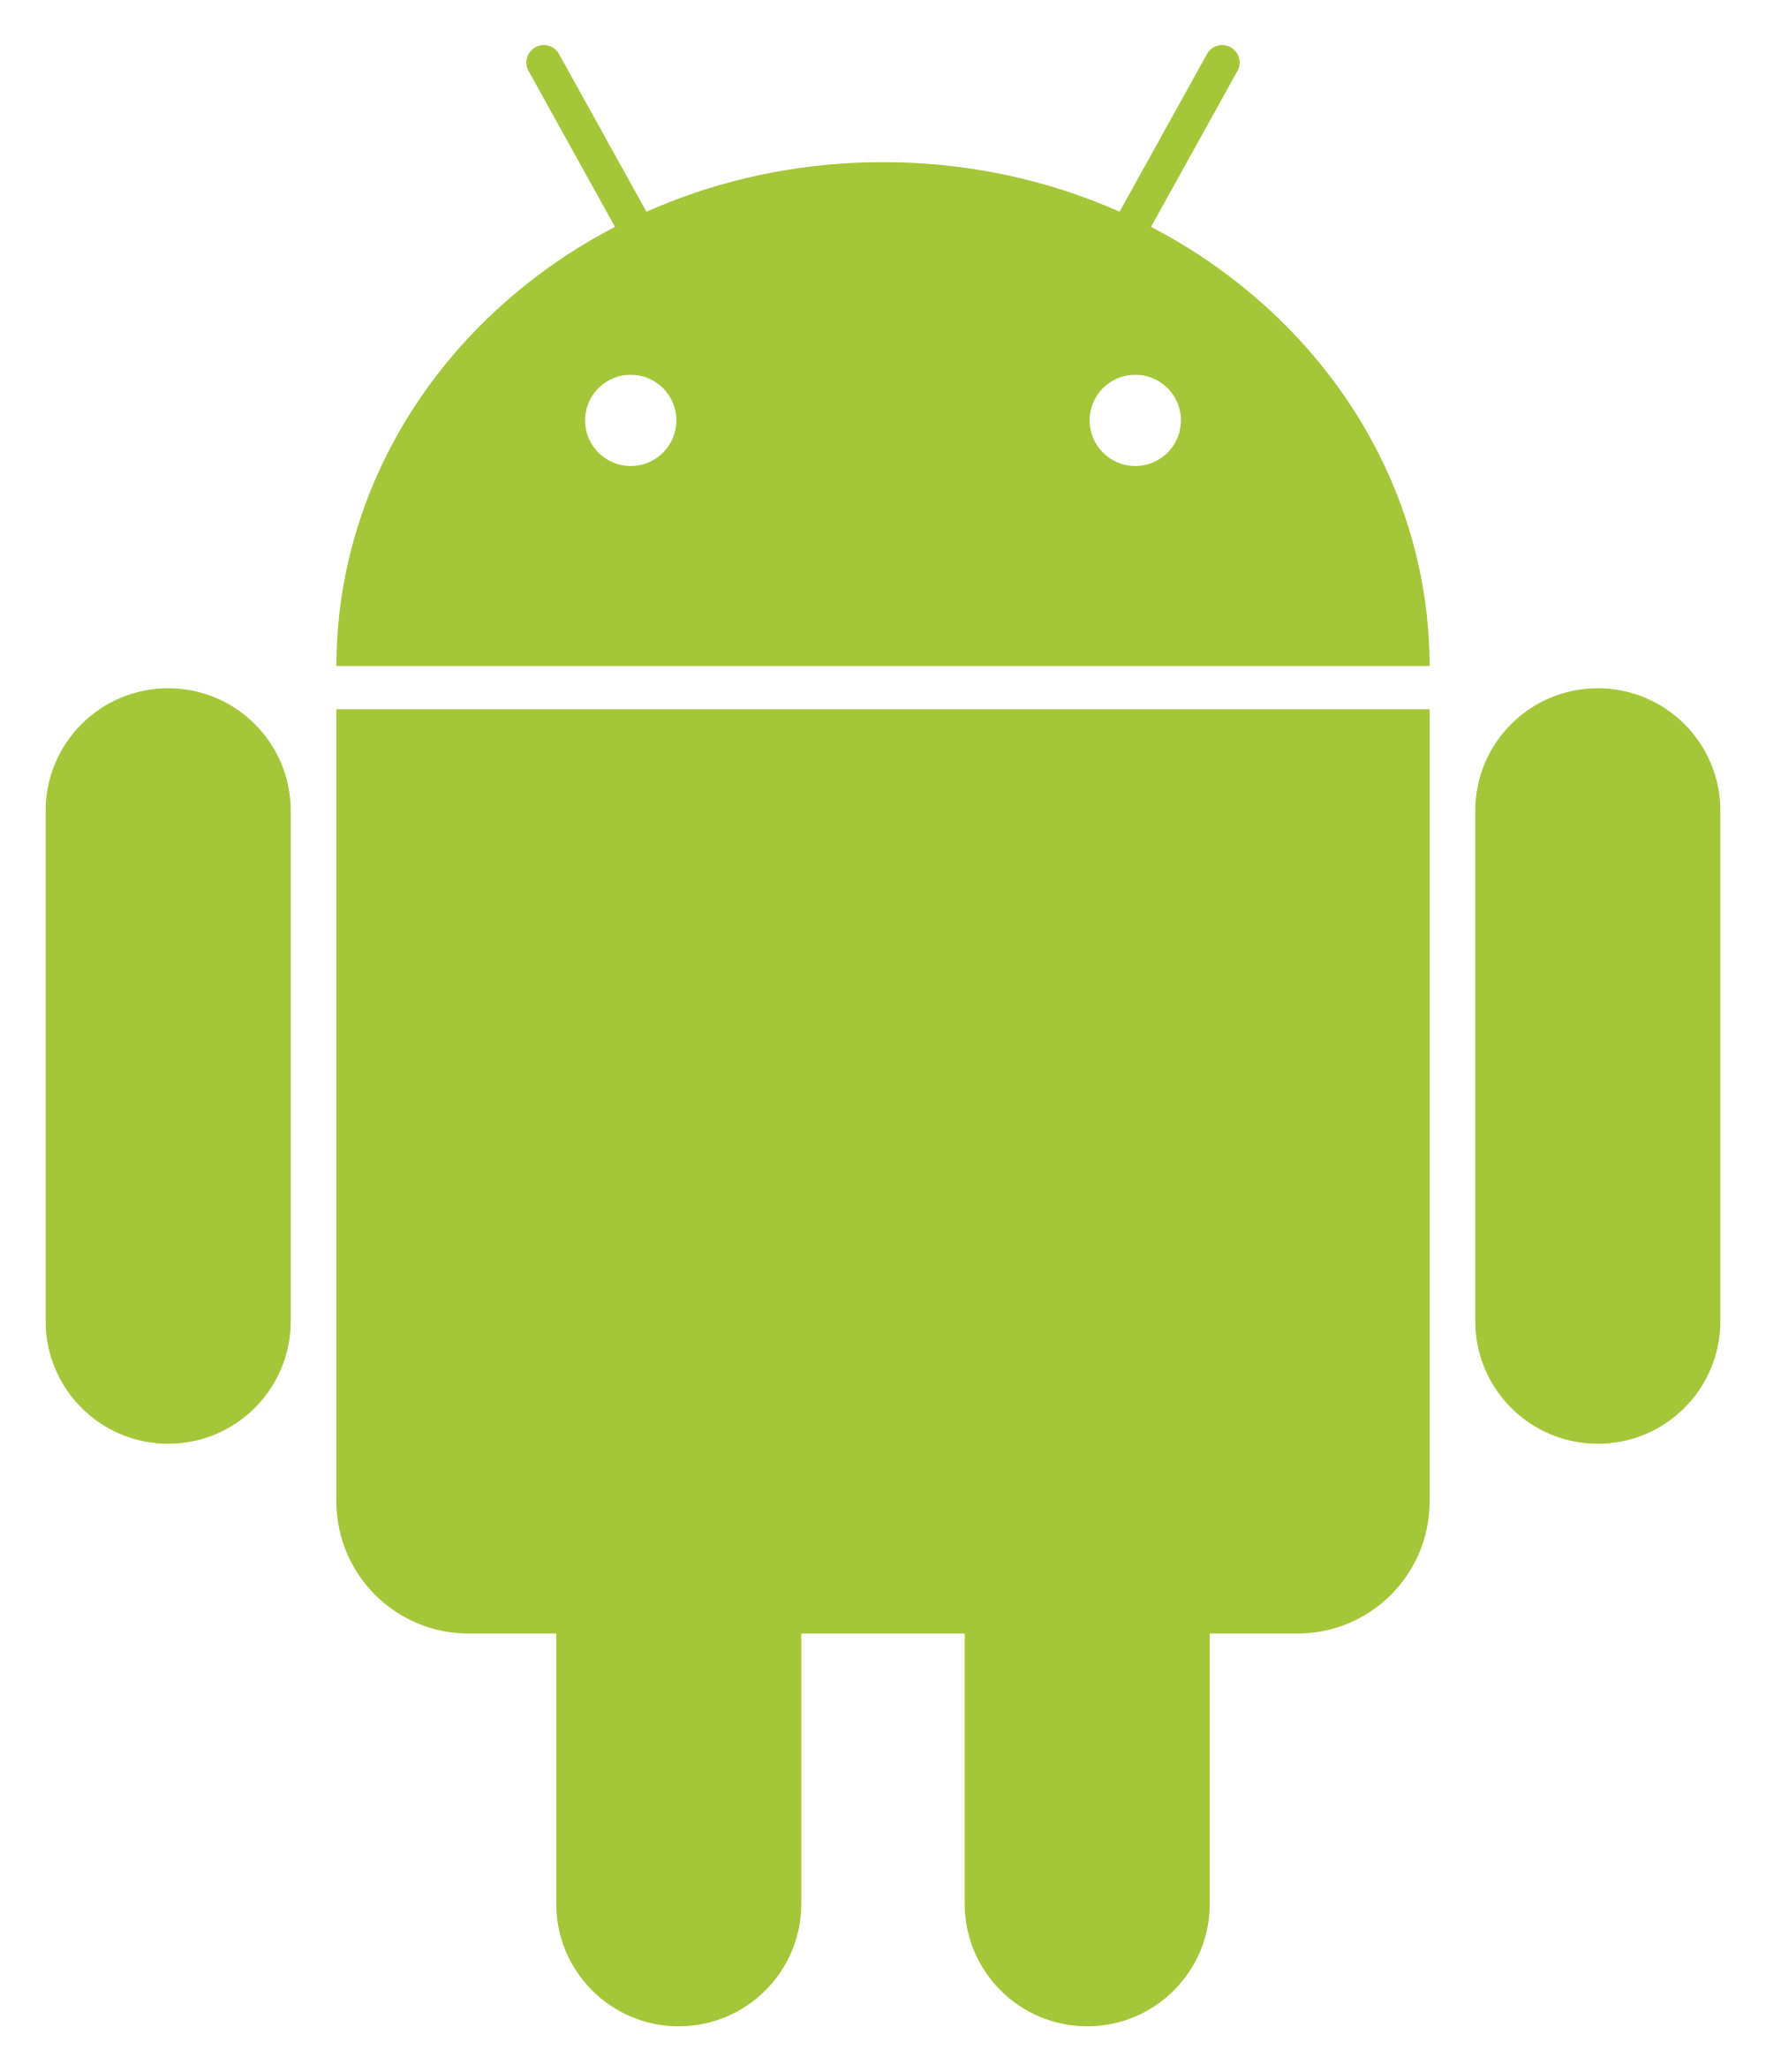 https://upload.wikimedia.org/wikipedia/commons/thumb/d/d7/Android_robot.svg/2000px-Android_robot.svg.png